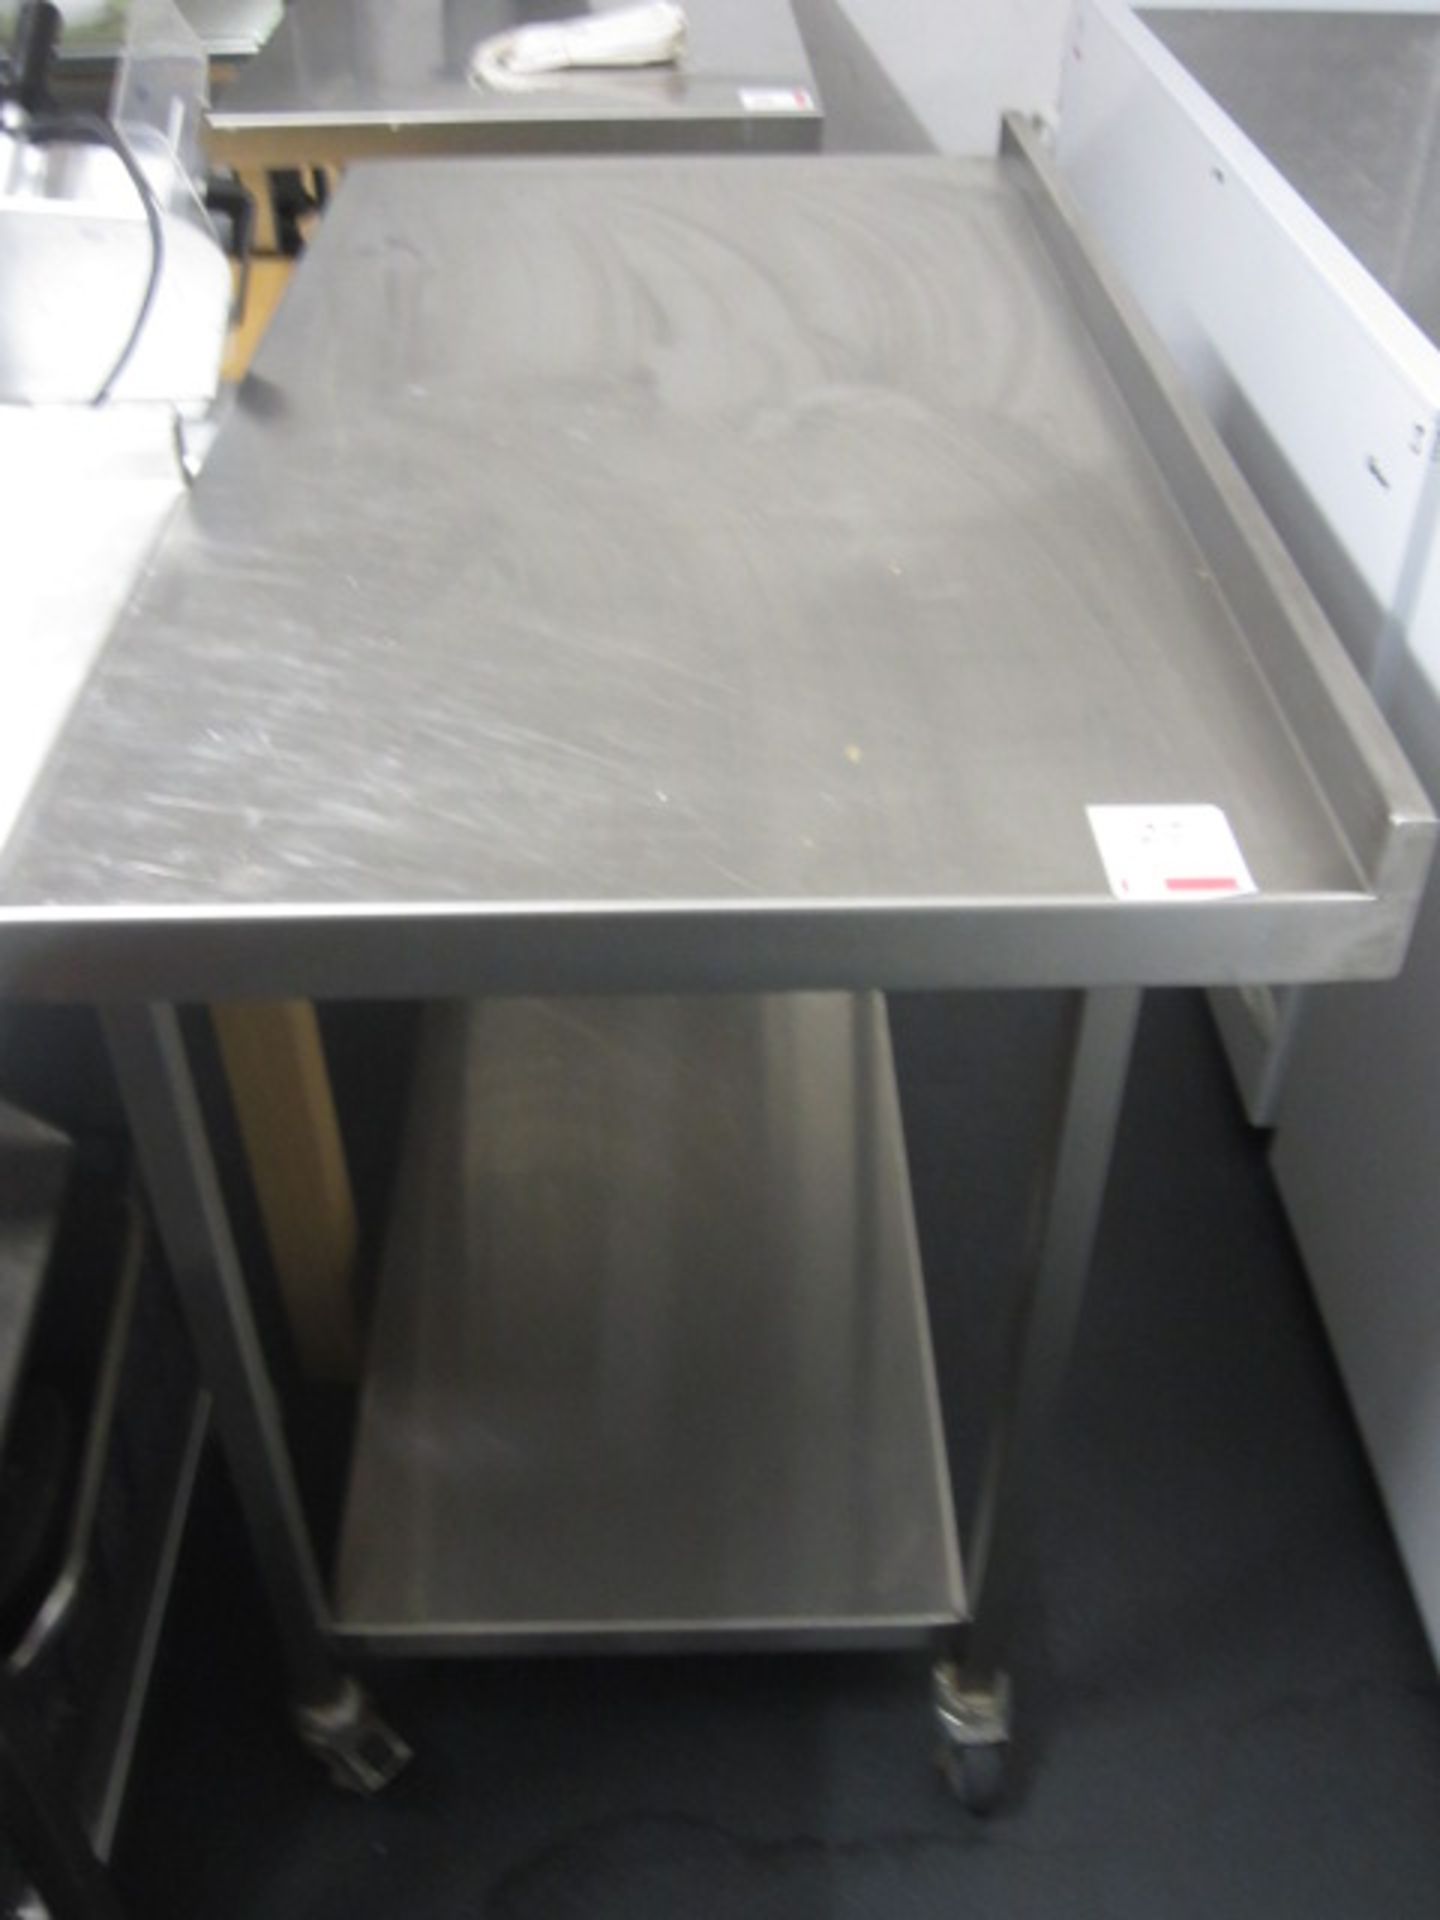 Stainless steel food preparation worksurface with under shelf, 1200mm x 650mm. Please ensure